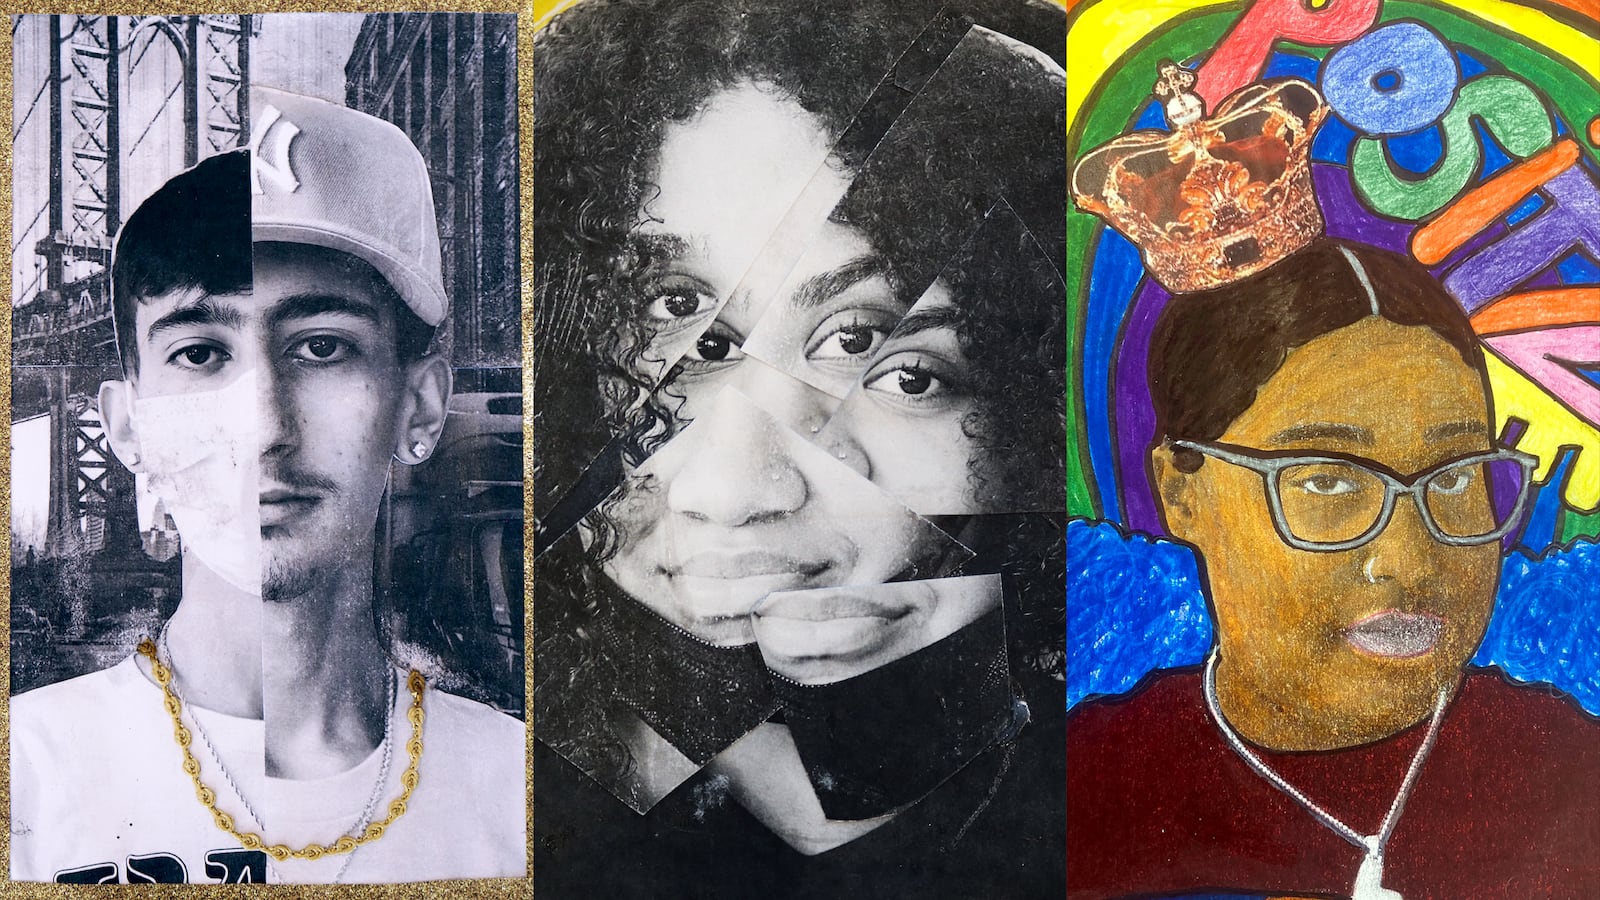 A triptych of three colorful self-portraits, made by students of Voyages Prep in Elmhurst, Queens.